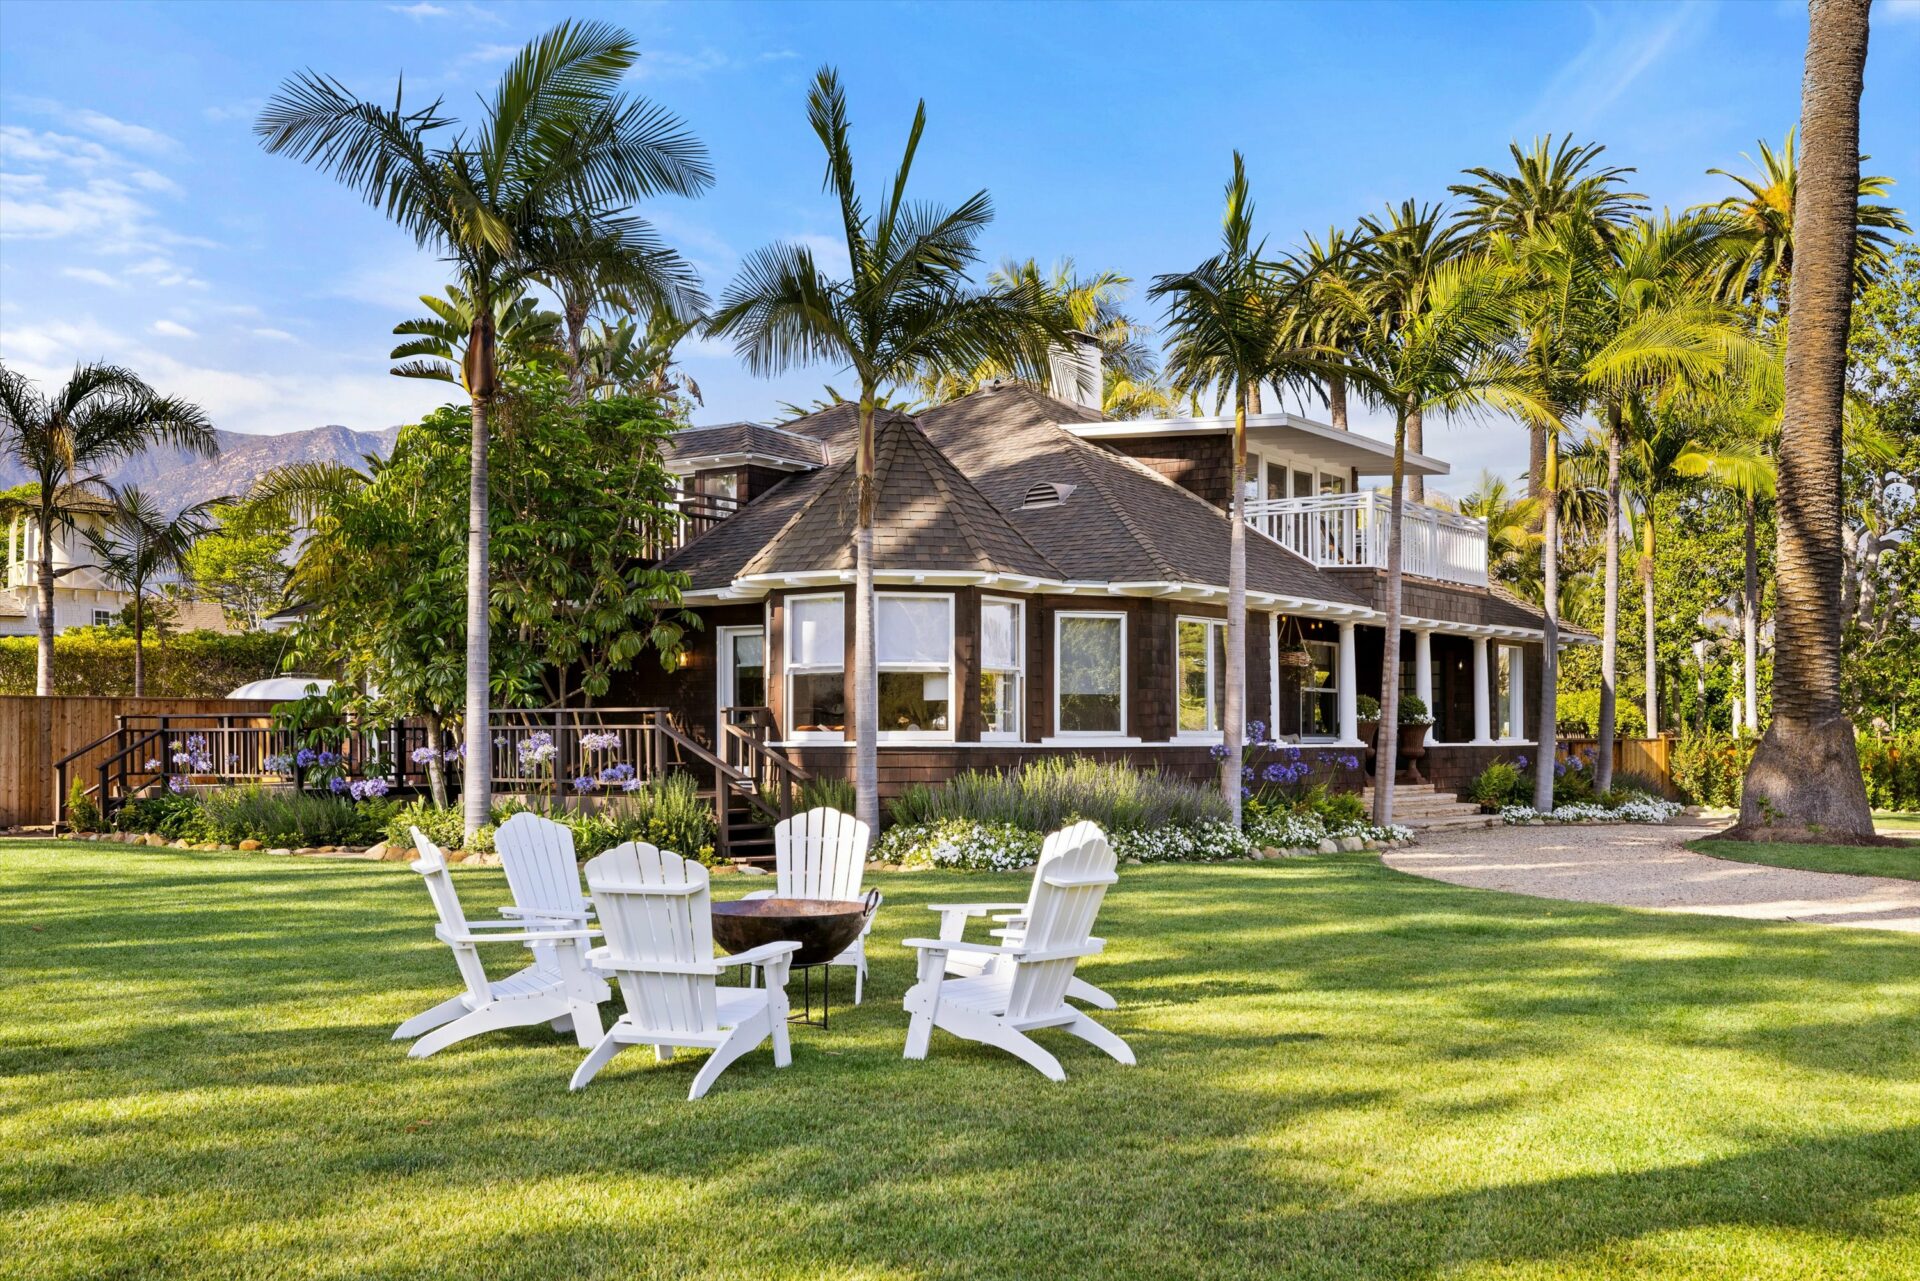 Luxury house with a landscaped garden and adirondack chairs on the lawn.